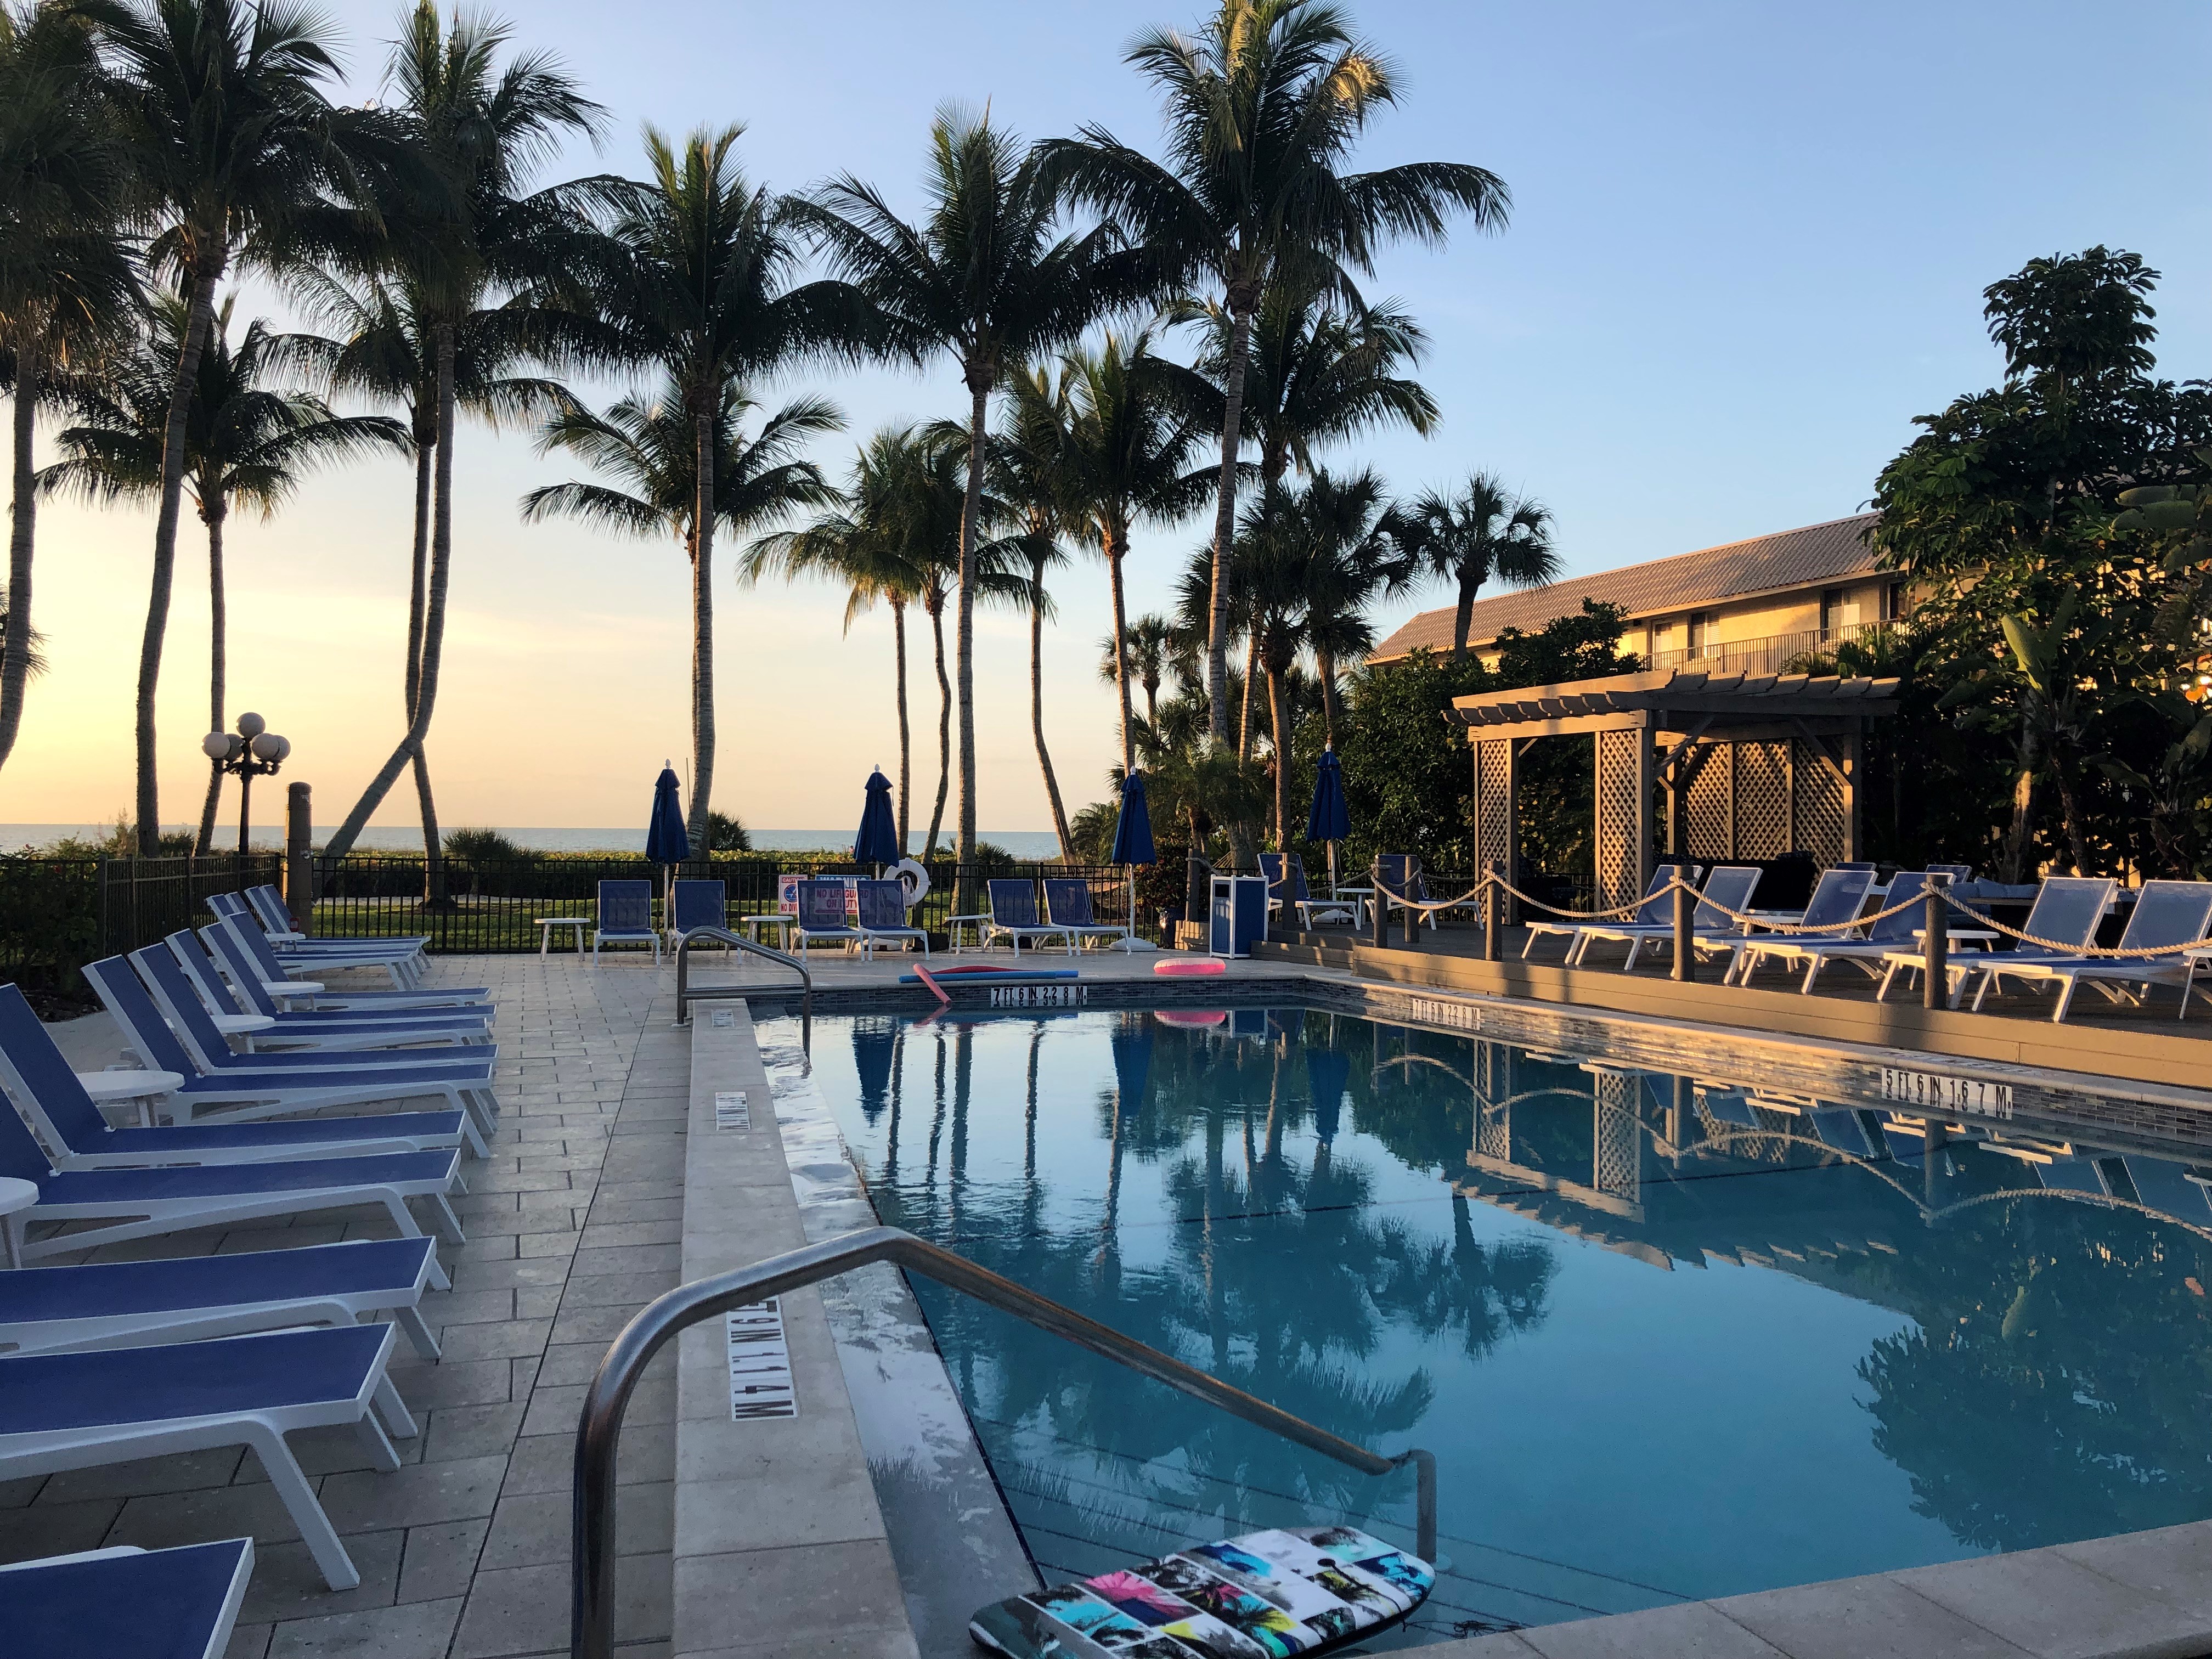 A Family Weekend at the Sanibel Island Beach Resort – We Go With Kids!